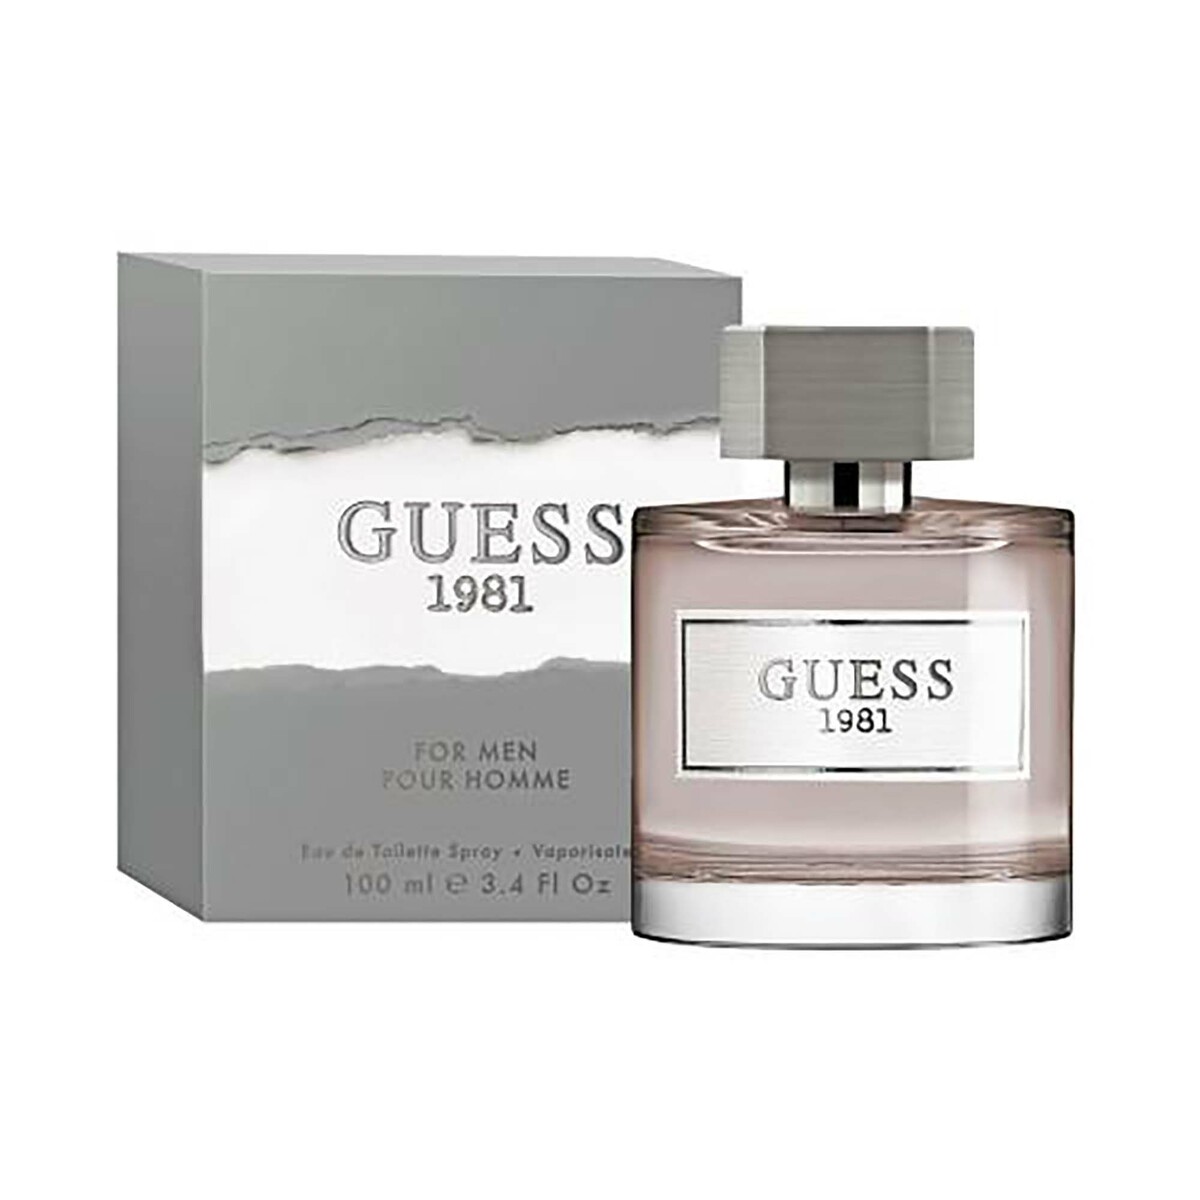 Guess 1981 EDT for Men 100ml